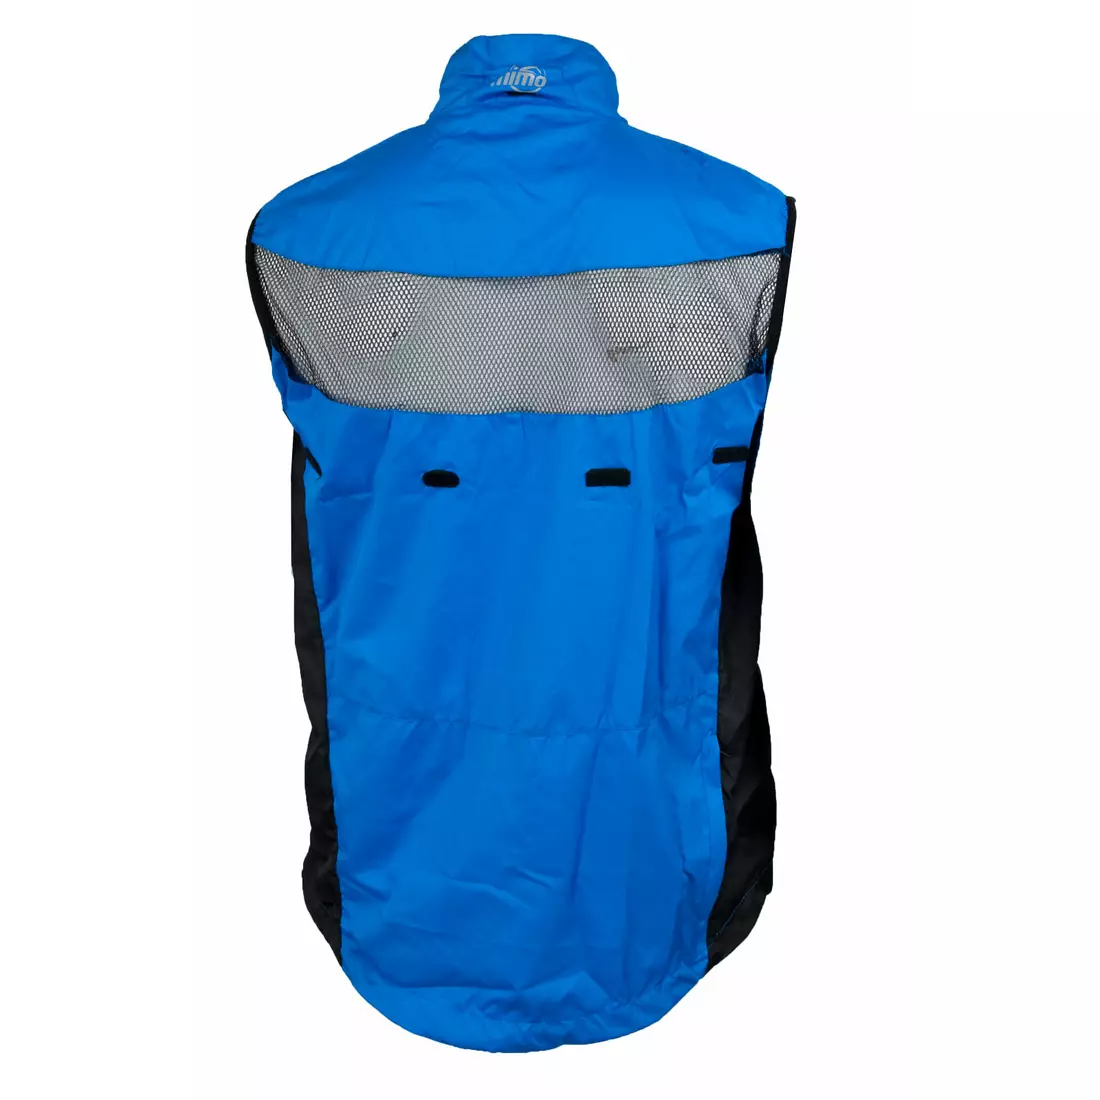 MikeSPORT SWORD - cycling jacket, detachable sleeves, color: Black and blue